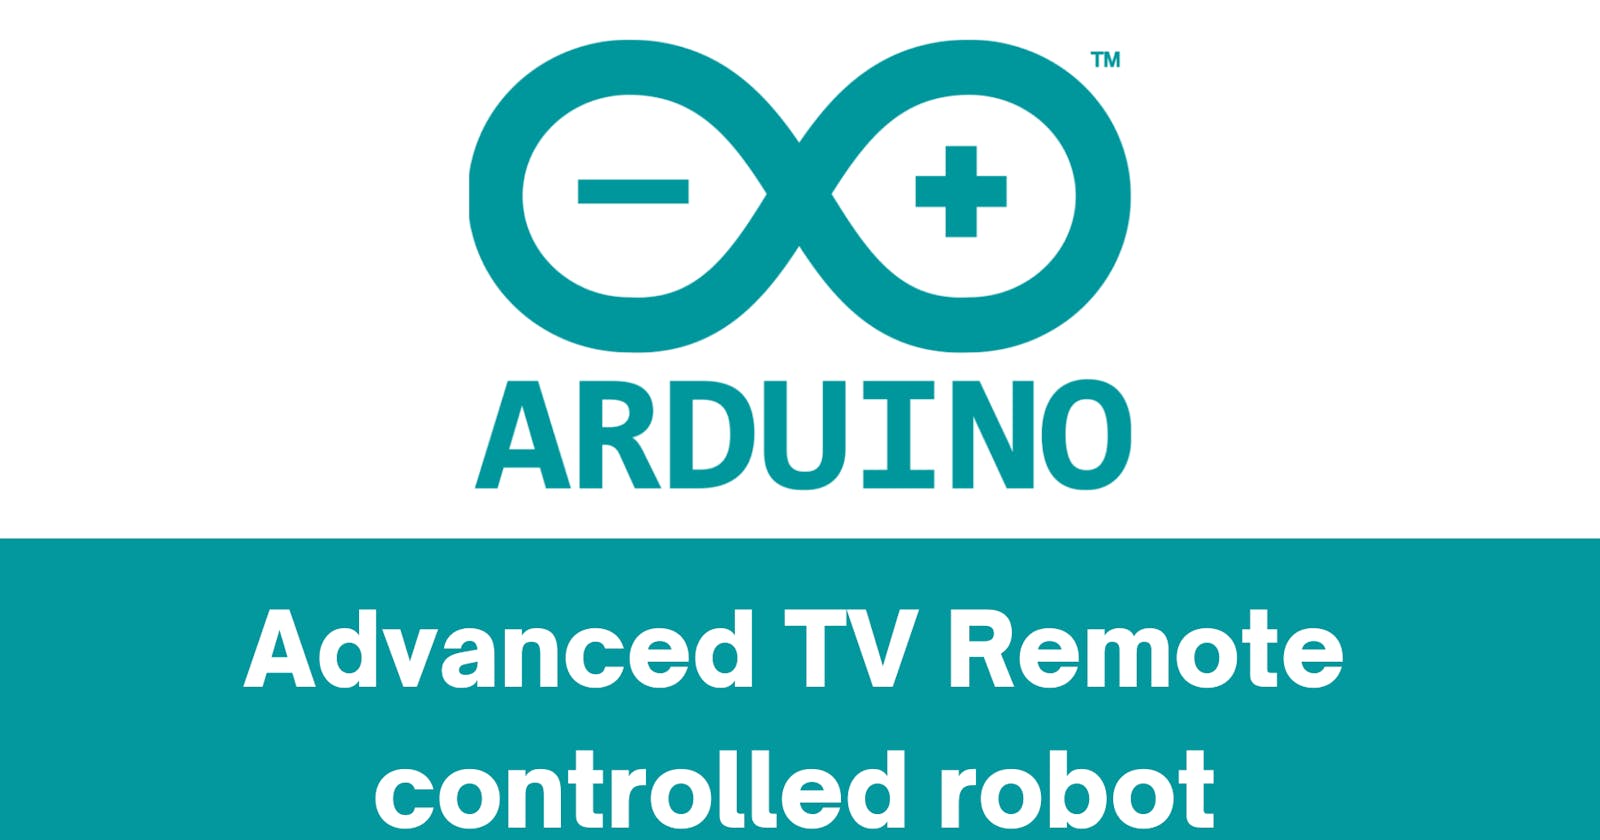 Advanced TV Remote controlled robot